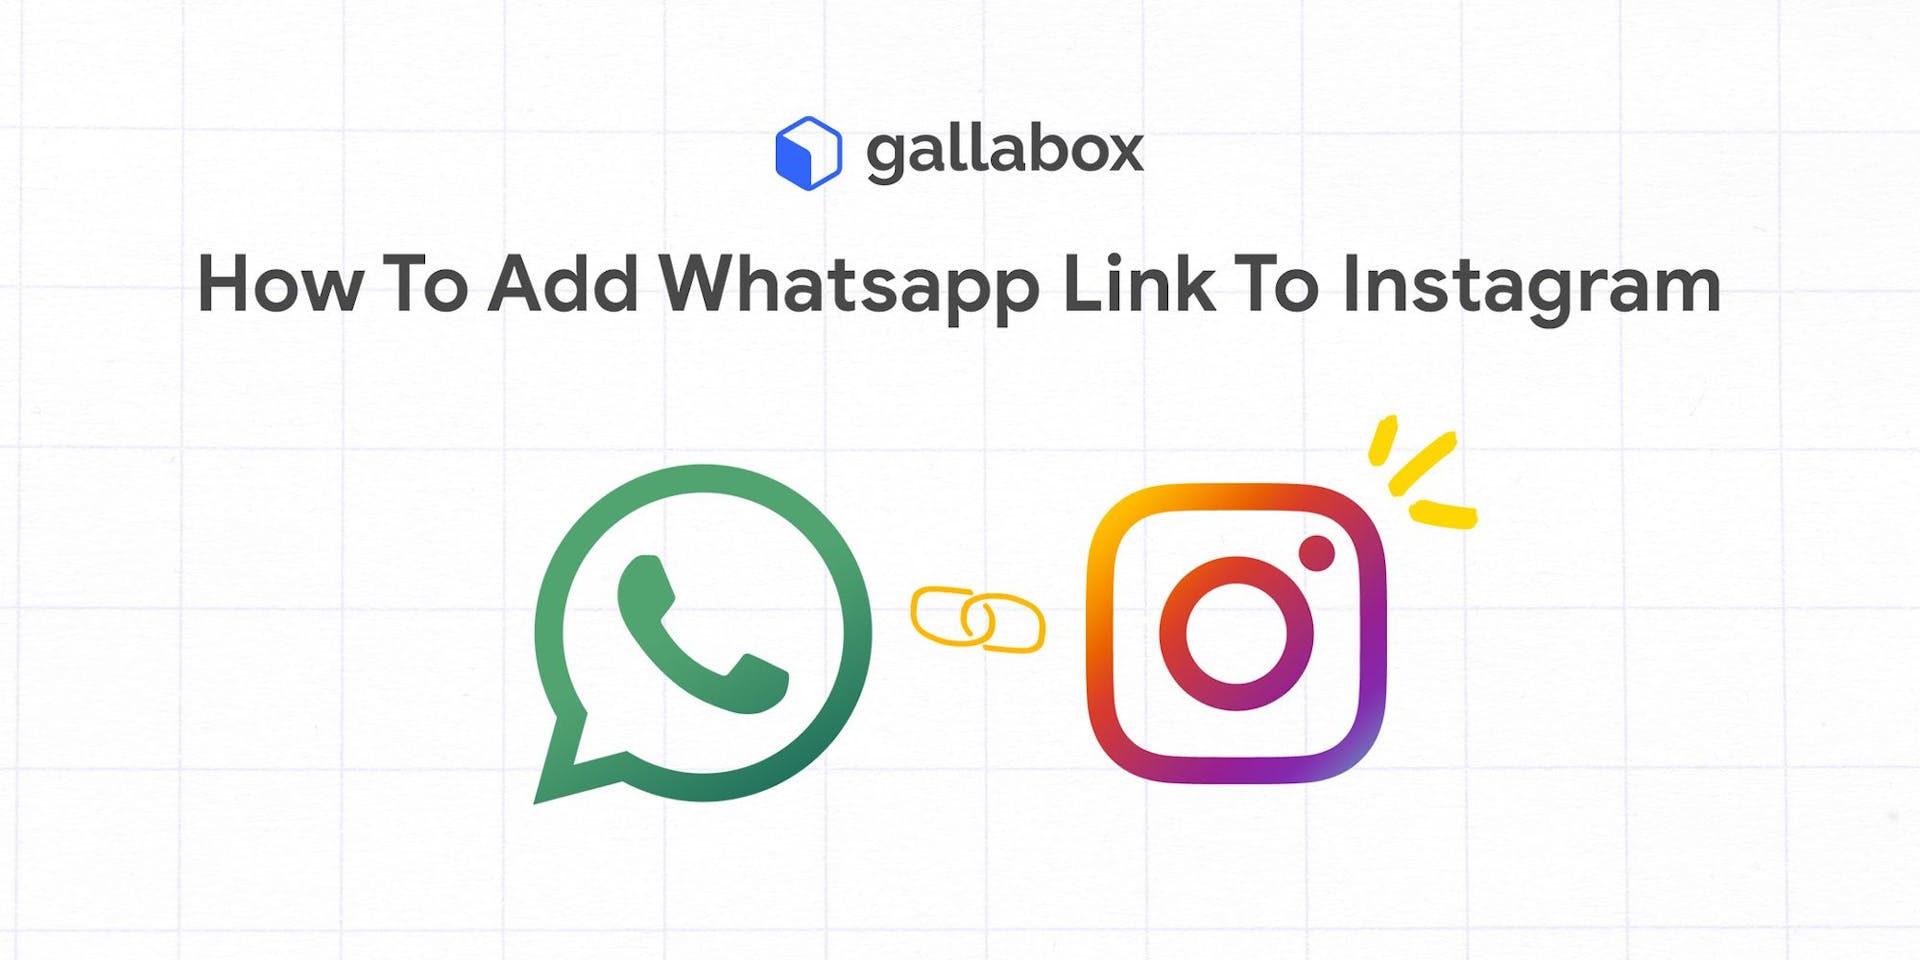 Add WhatsApp Links To Instagram: A quick guide